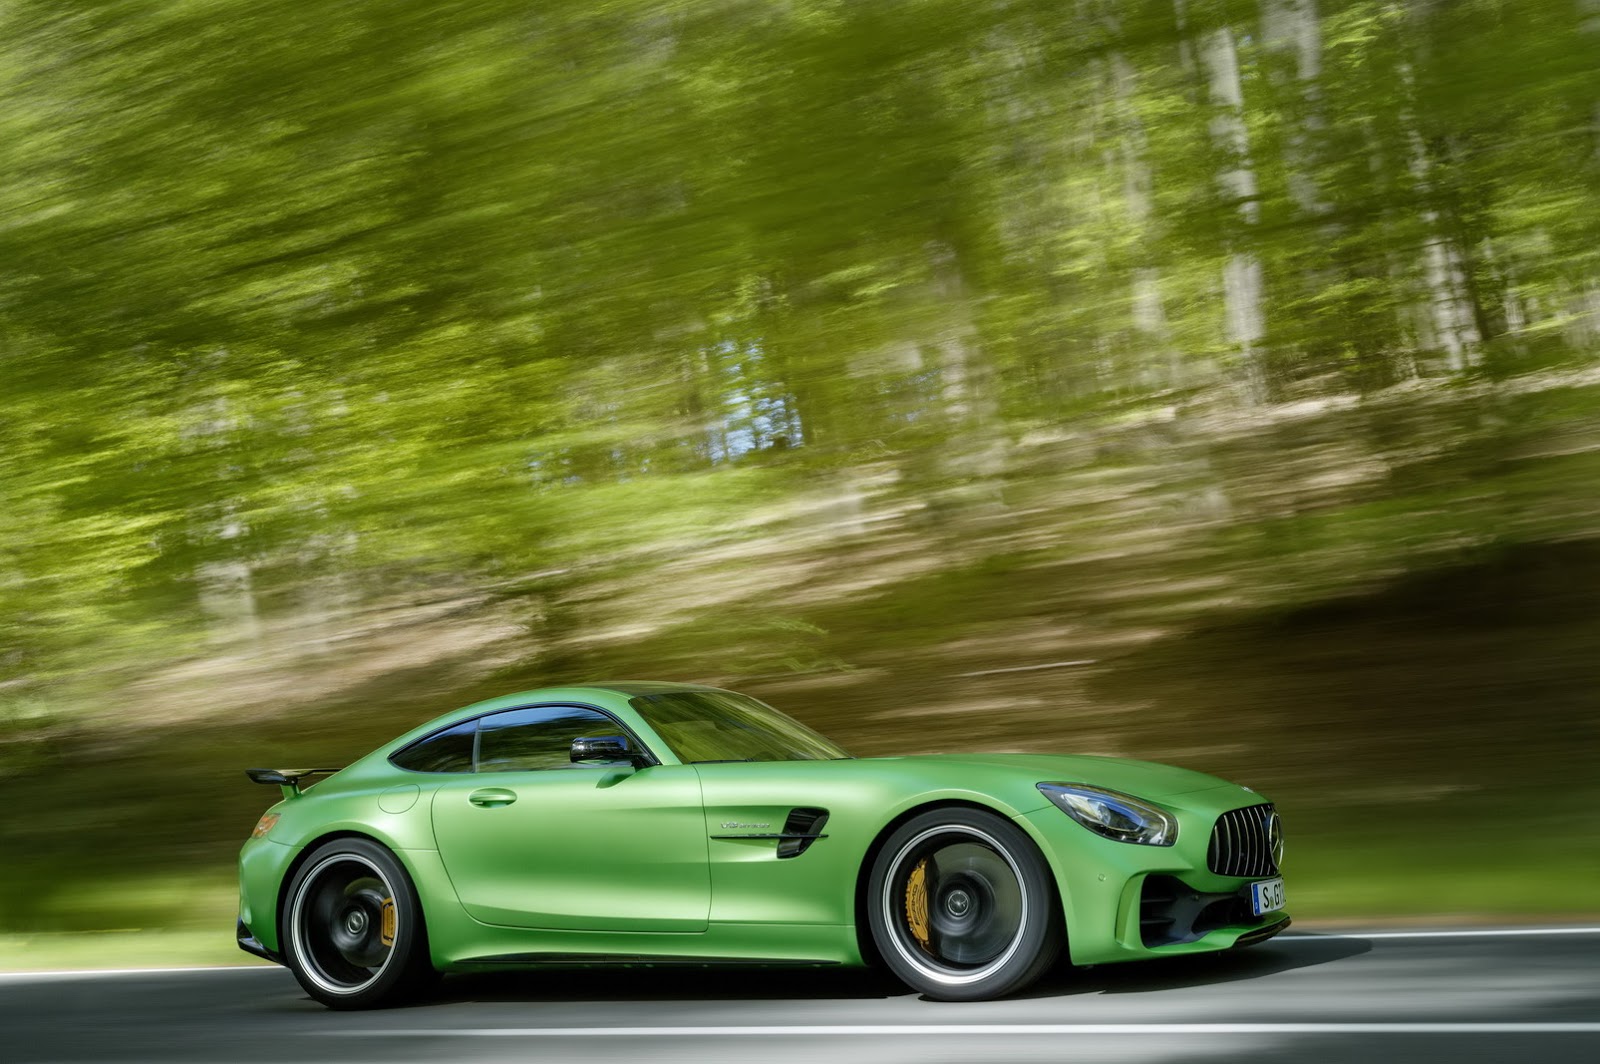 The All-New Mercedes-AMG GT is Here! - Mercedes-Benz of Scottsdale